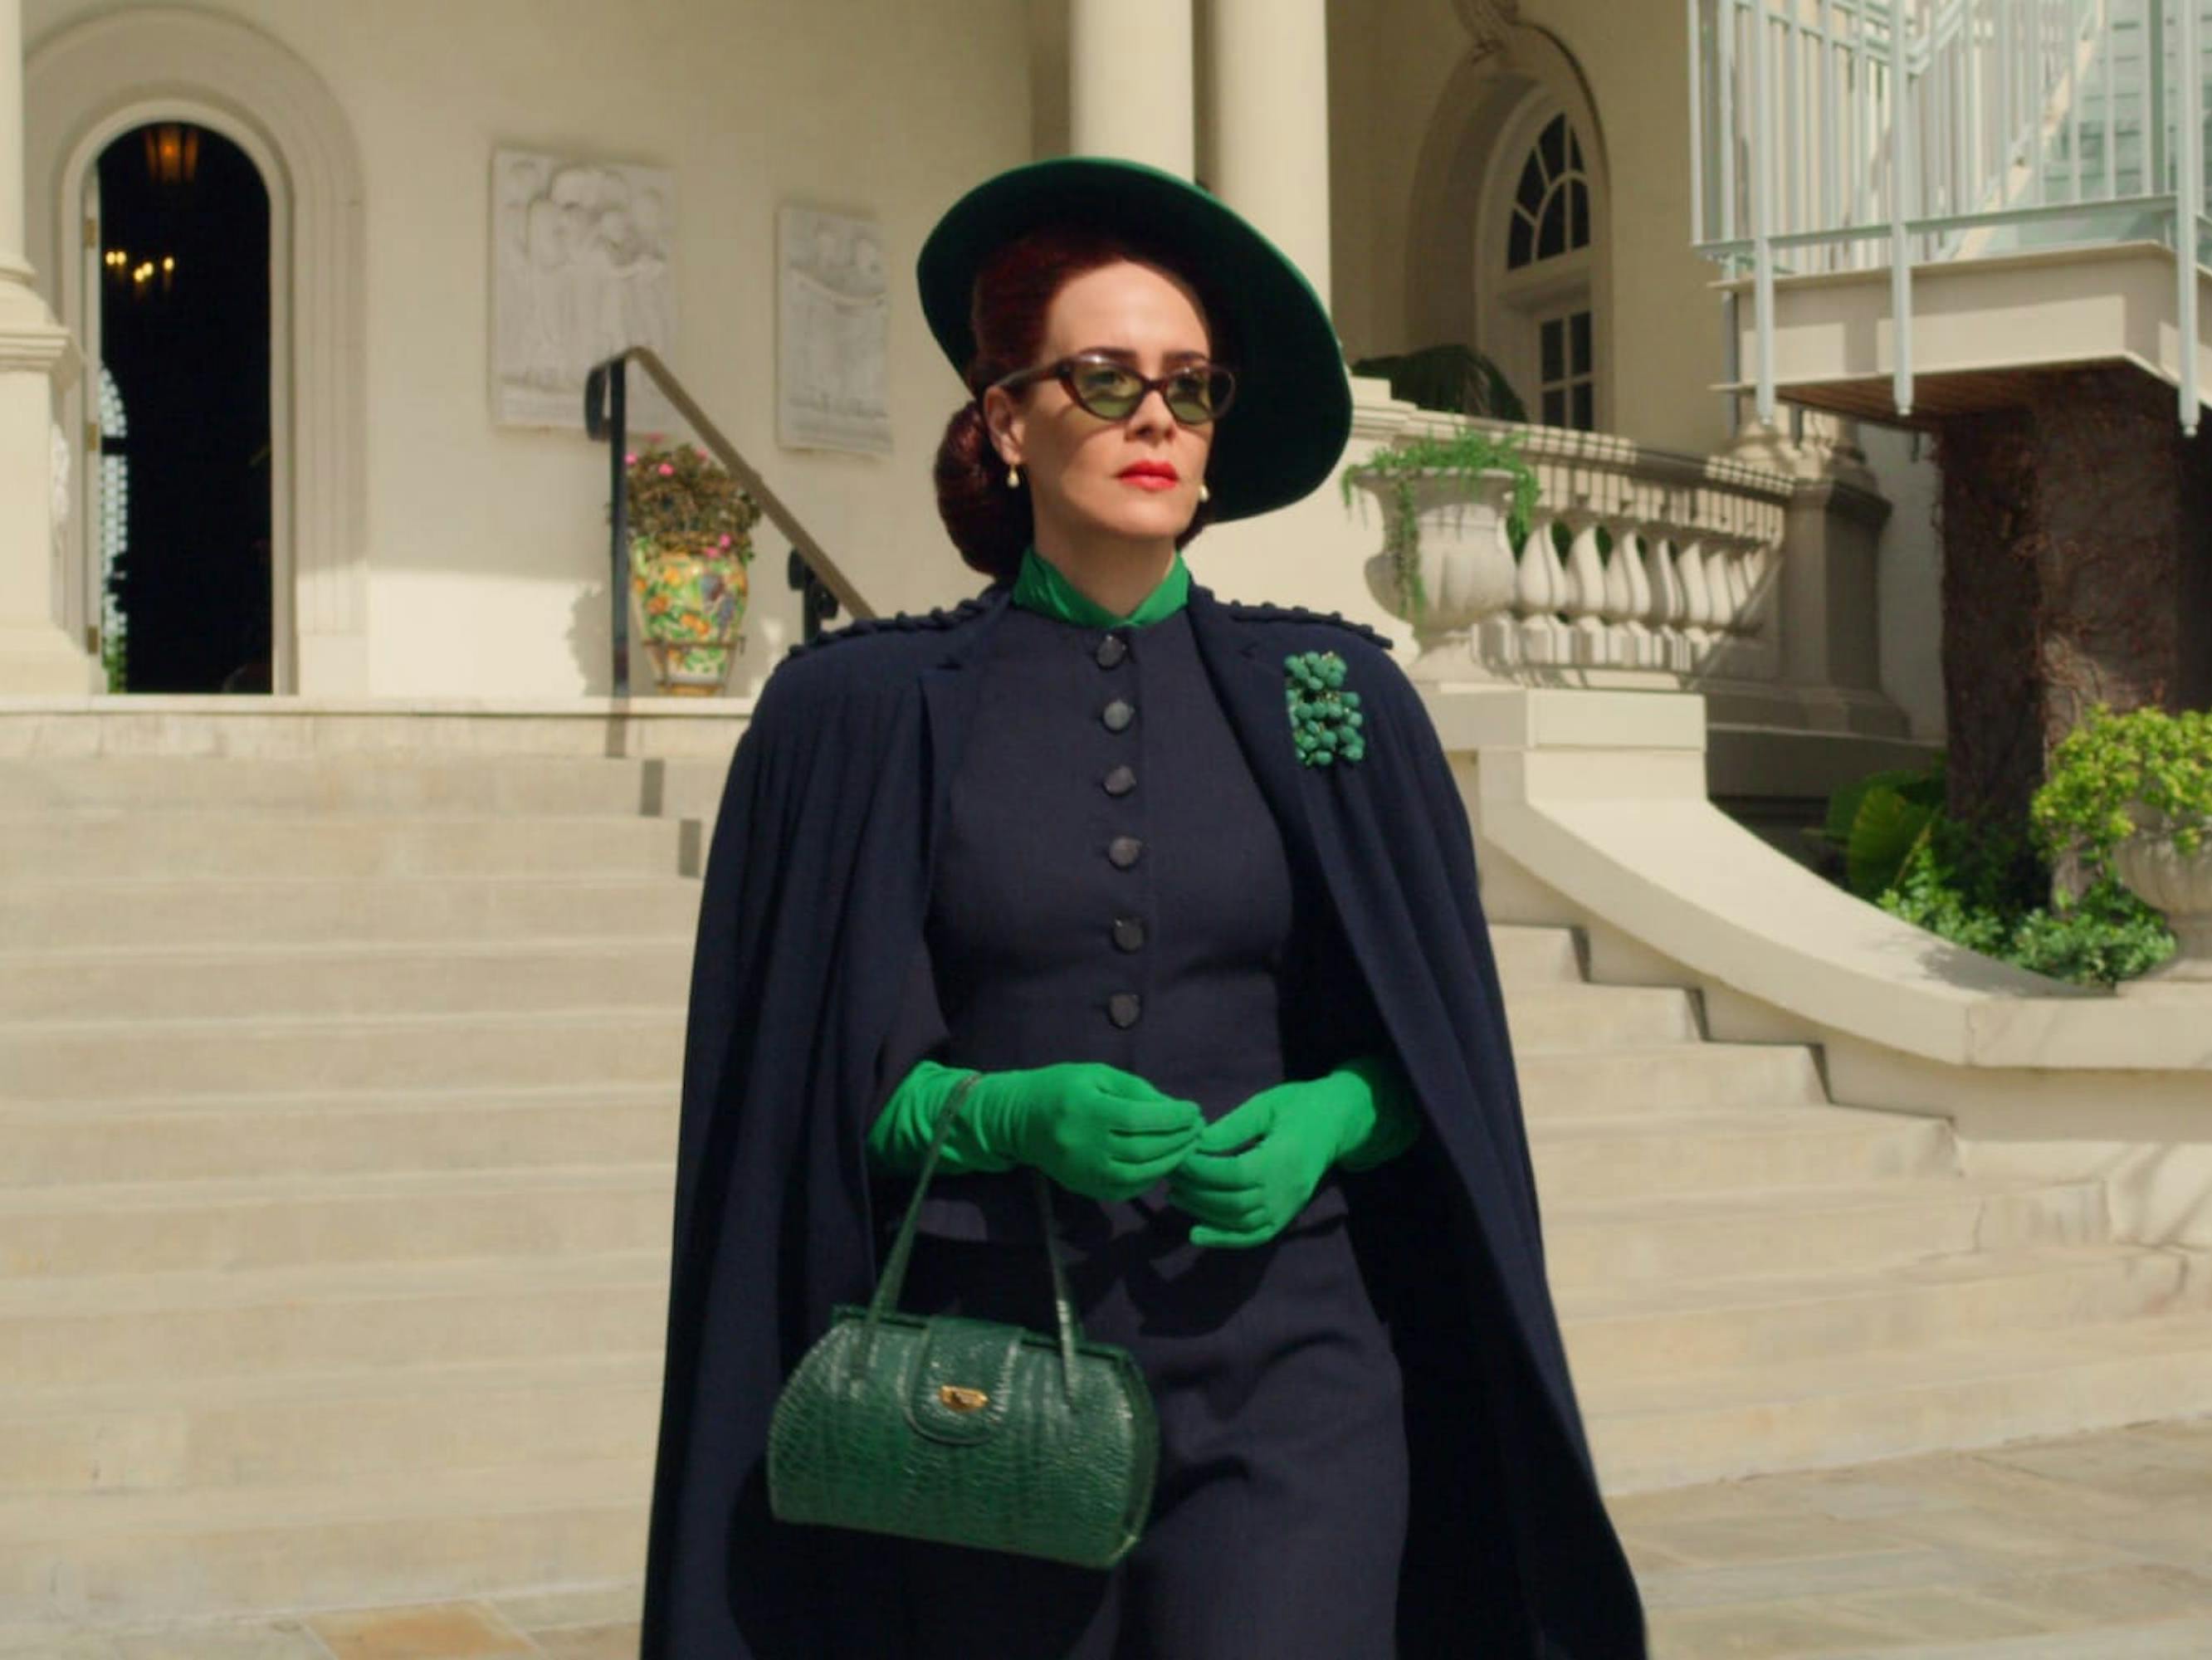 Nurse Mildred Ratched (Sarah Paulson) wears a black ensemble trimmed with green, reminiscent of the wicked witch of the west. Her green bag, color, and gloves allude to nefarious activity.